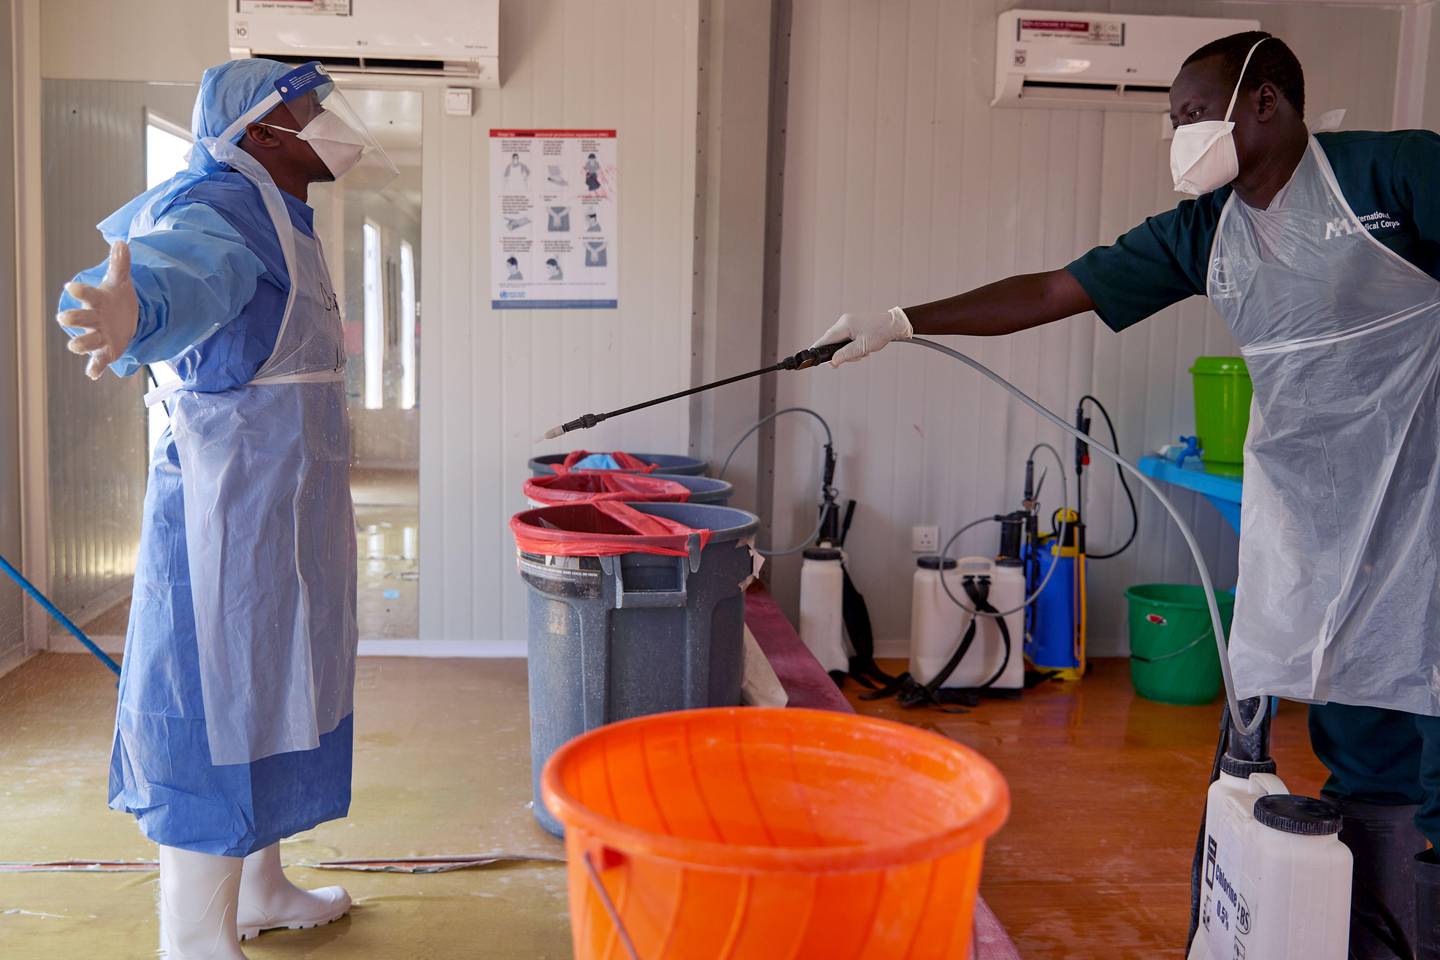 A doctor of International Medical Corps (IMC) is disinfected at the isolation ward of Ministry of Health Infectious Disease Unit in Juba, South Sudan, on April 24, 2020. - The national facility hosts South Sudan�s fifth case of the COVID-19 Coronavirus, who was admitted yesterday. (Photo by Alex McBride / AFP)